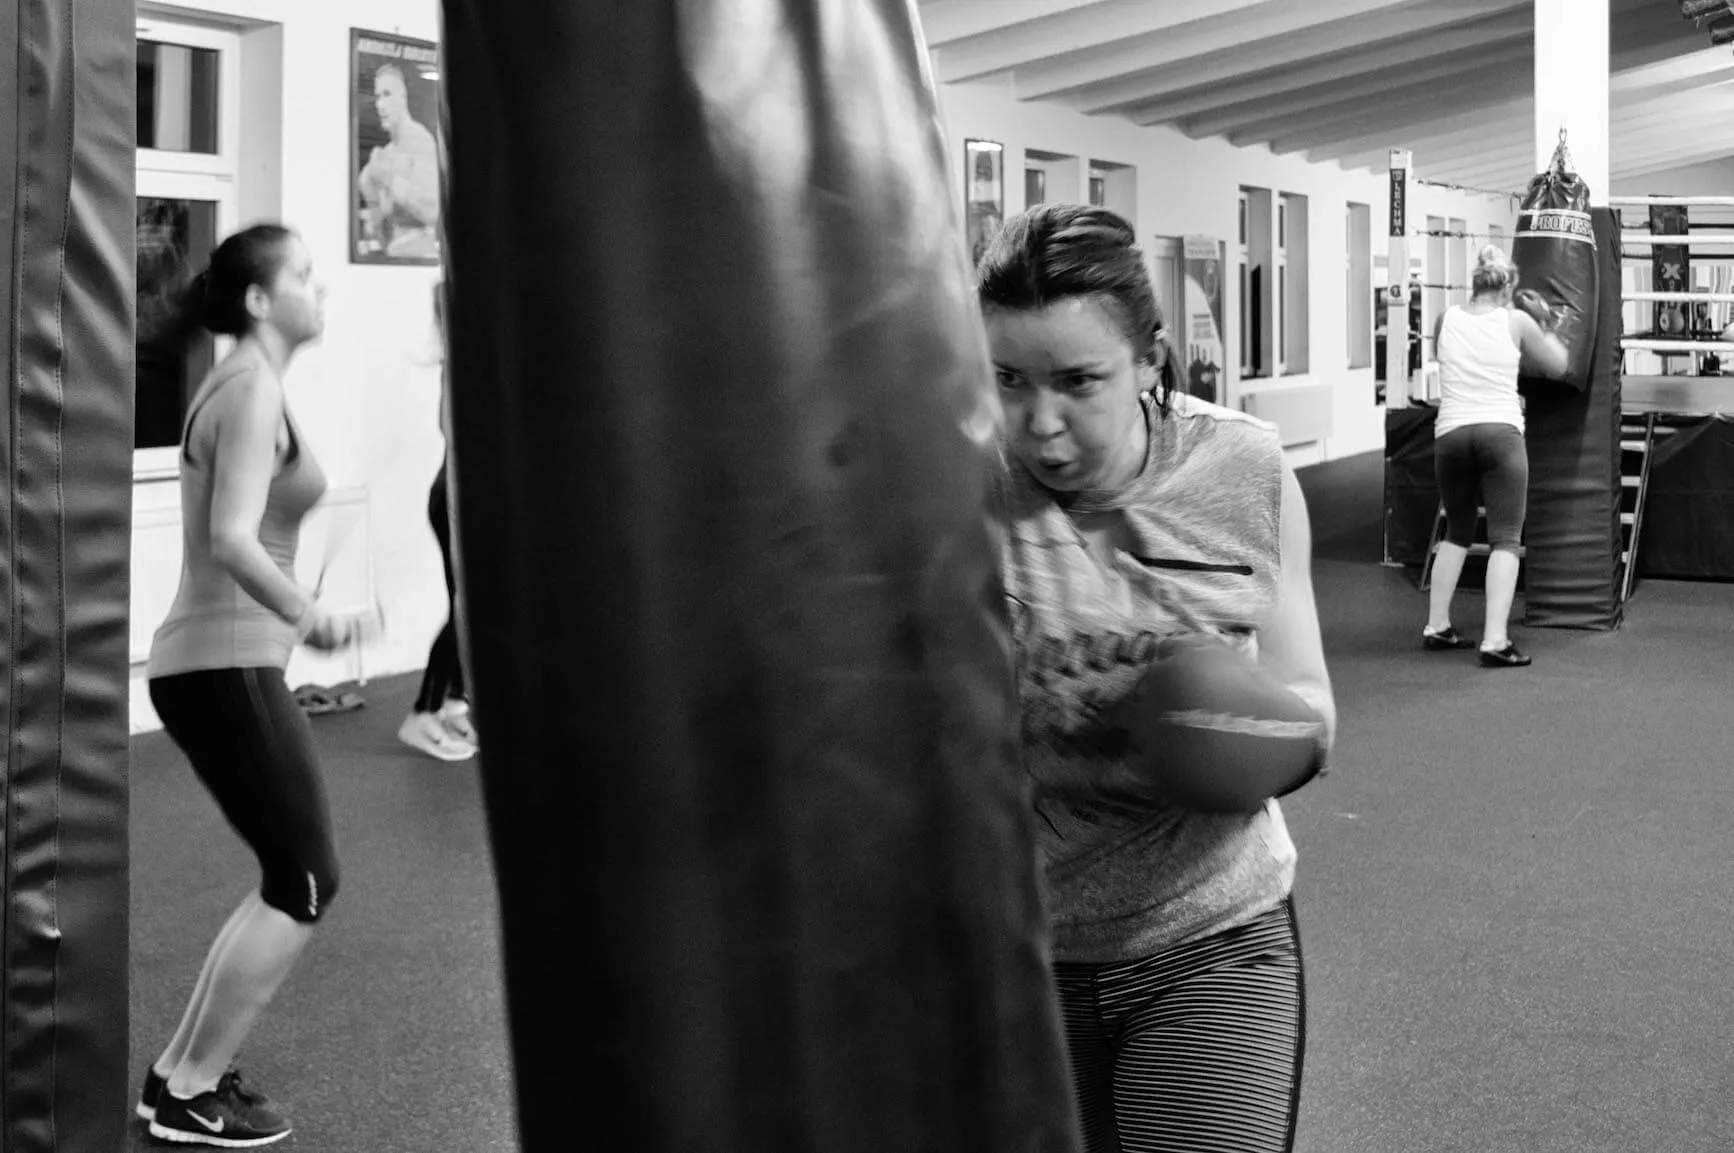 Lady boxing during the training